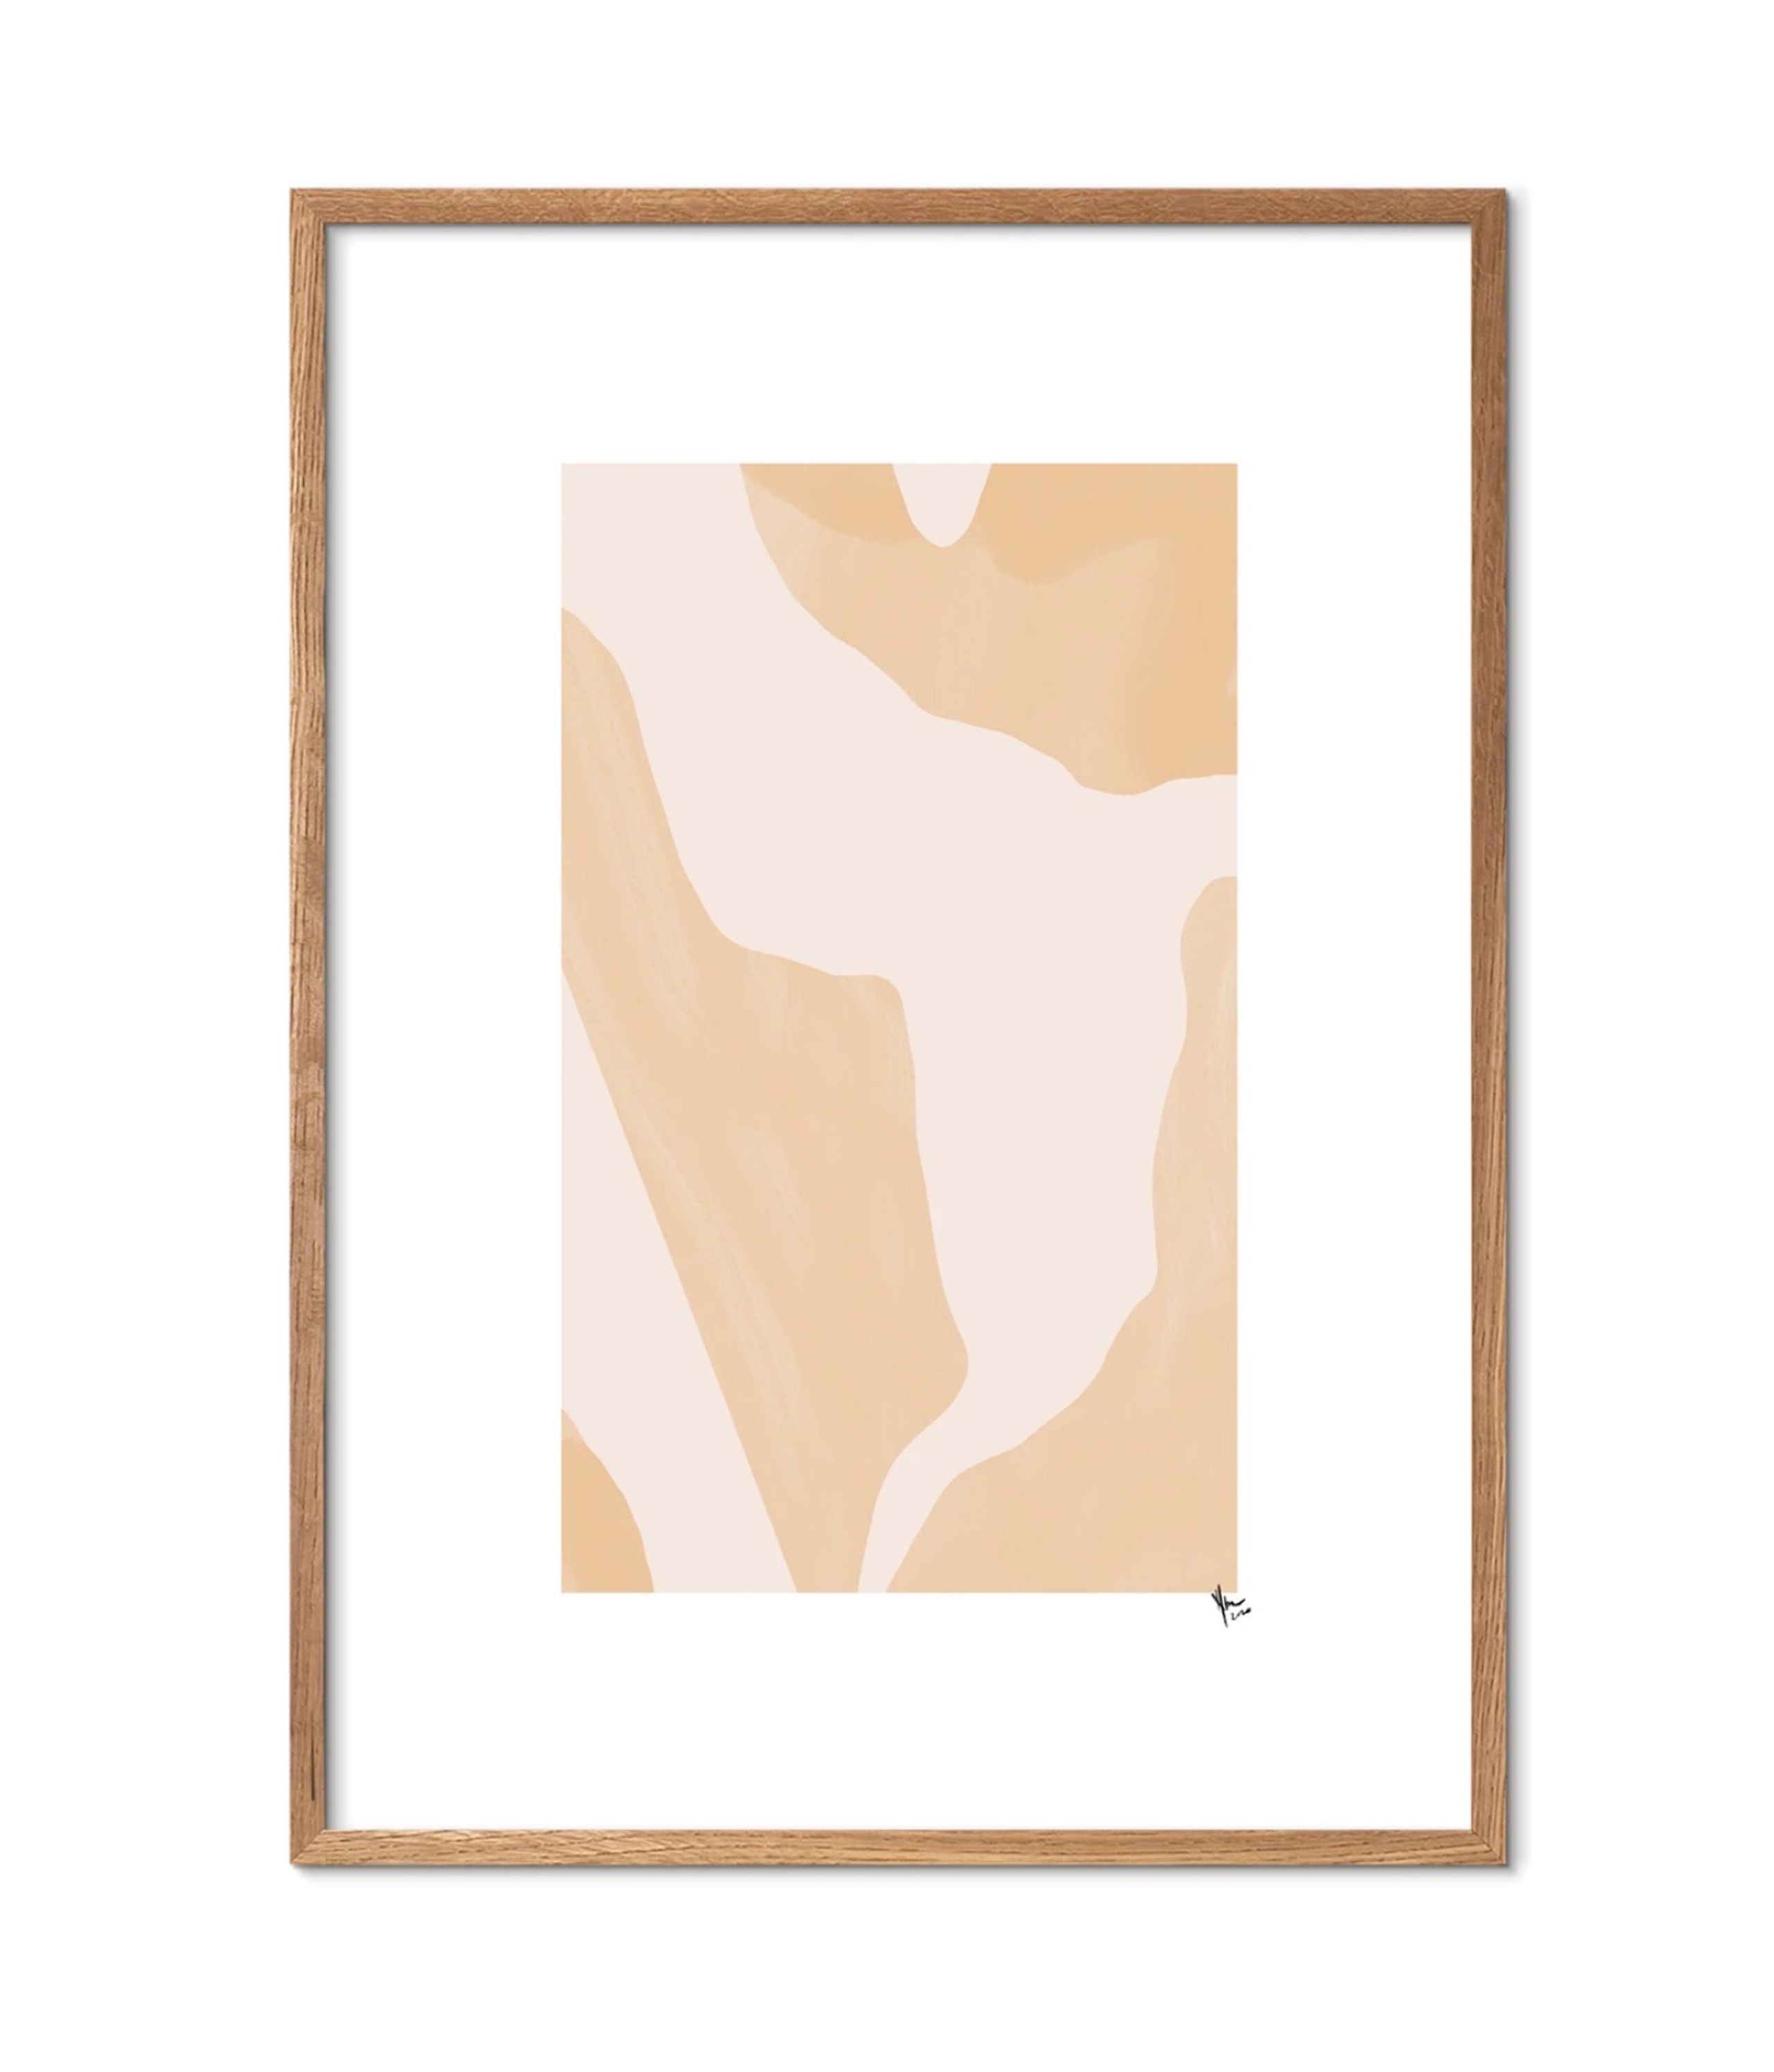 Poster and Frame - Poster - Le Calme by N. Atelier - Le Calme